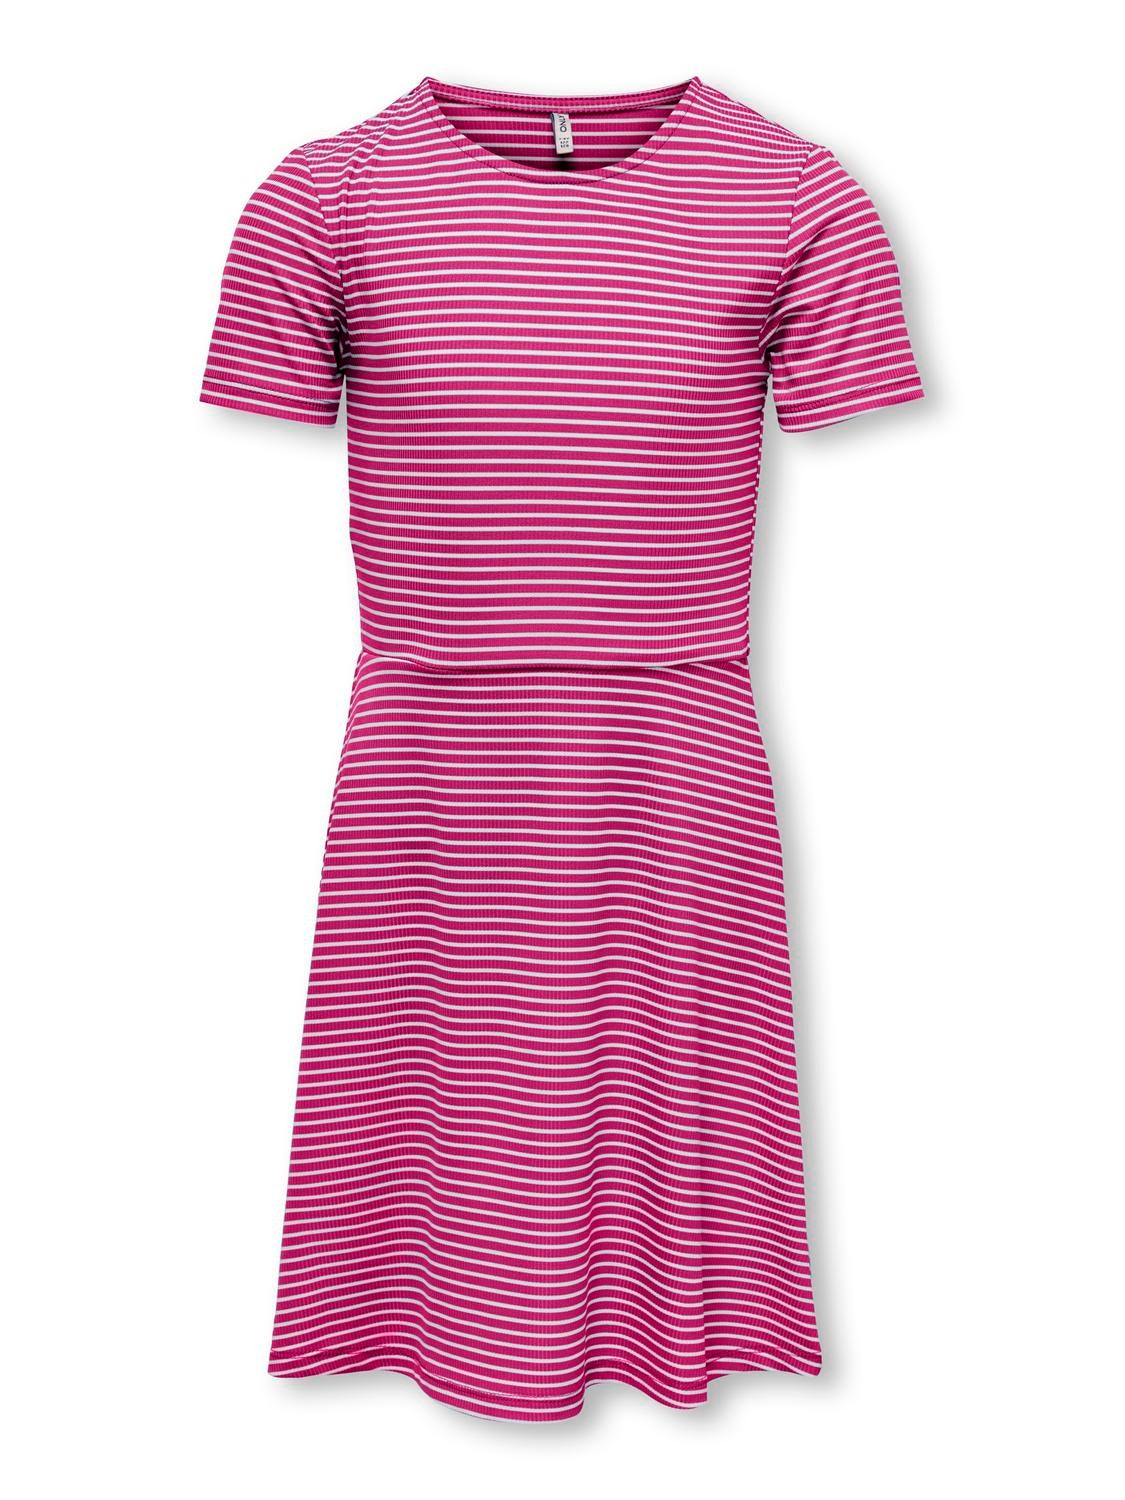 ONLY Ribbed Skater Dress -Very Berry - 15285369